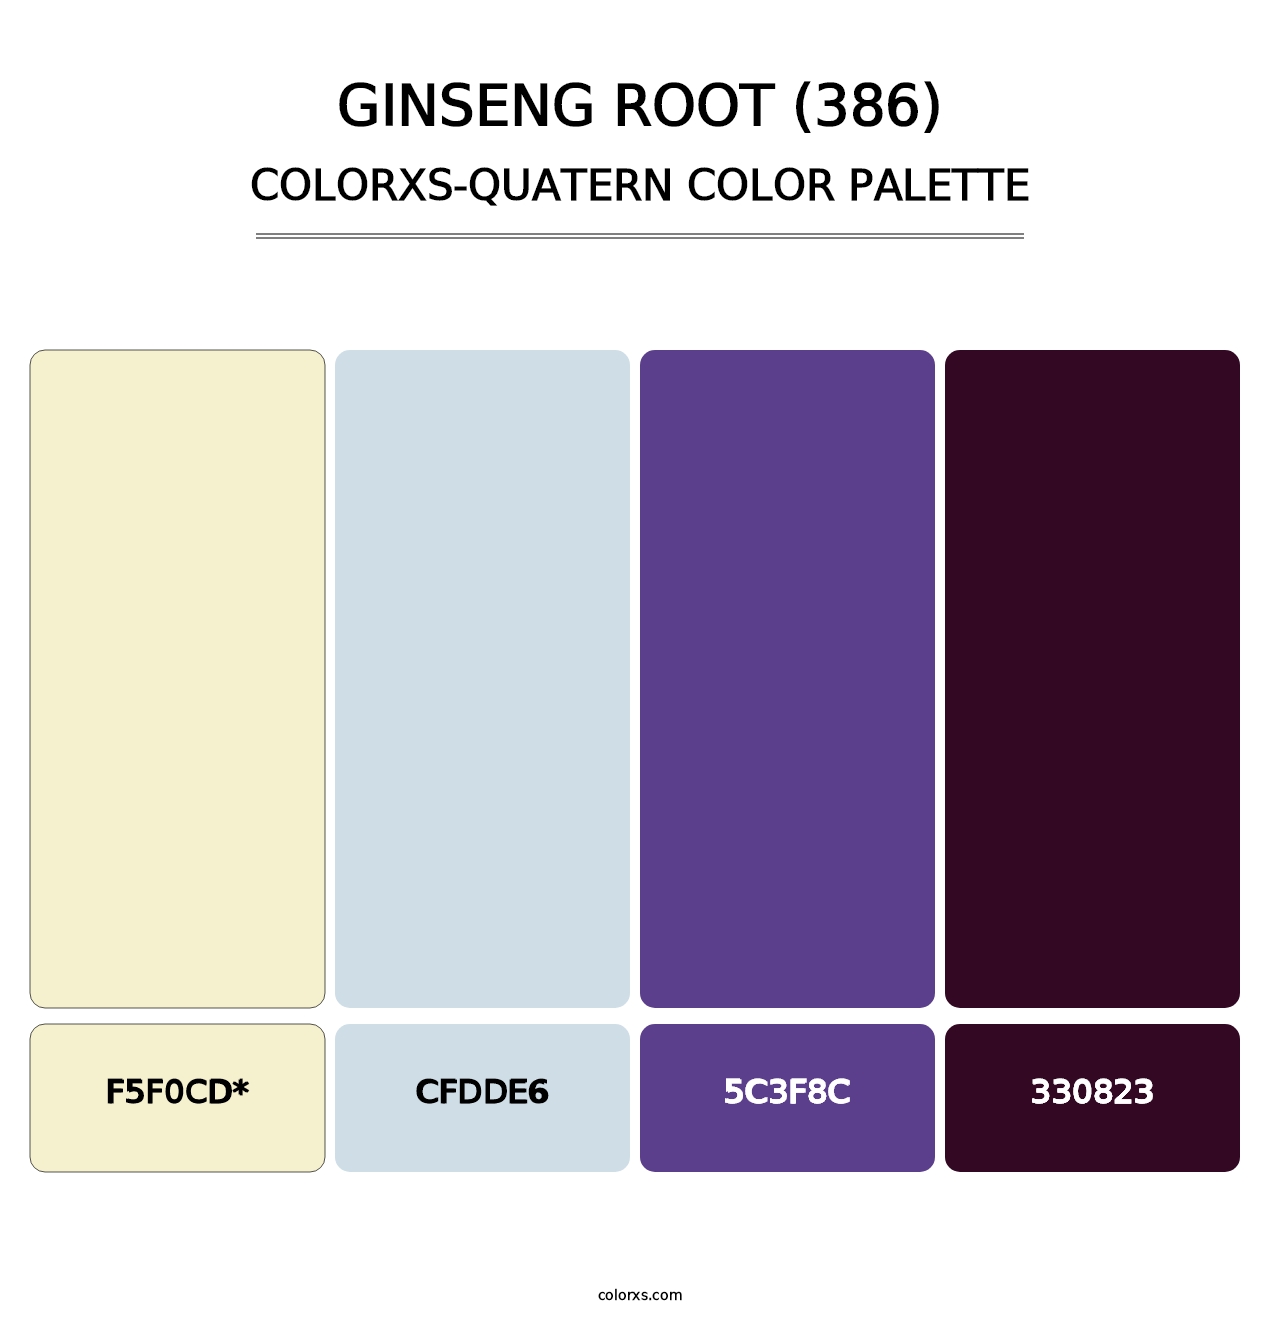 Ginseng Root (386) - Colorxs Quatern Palette